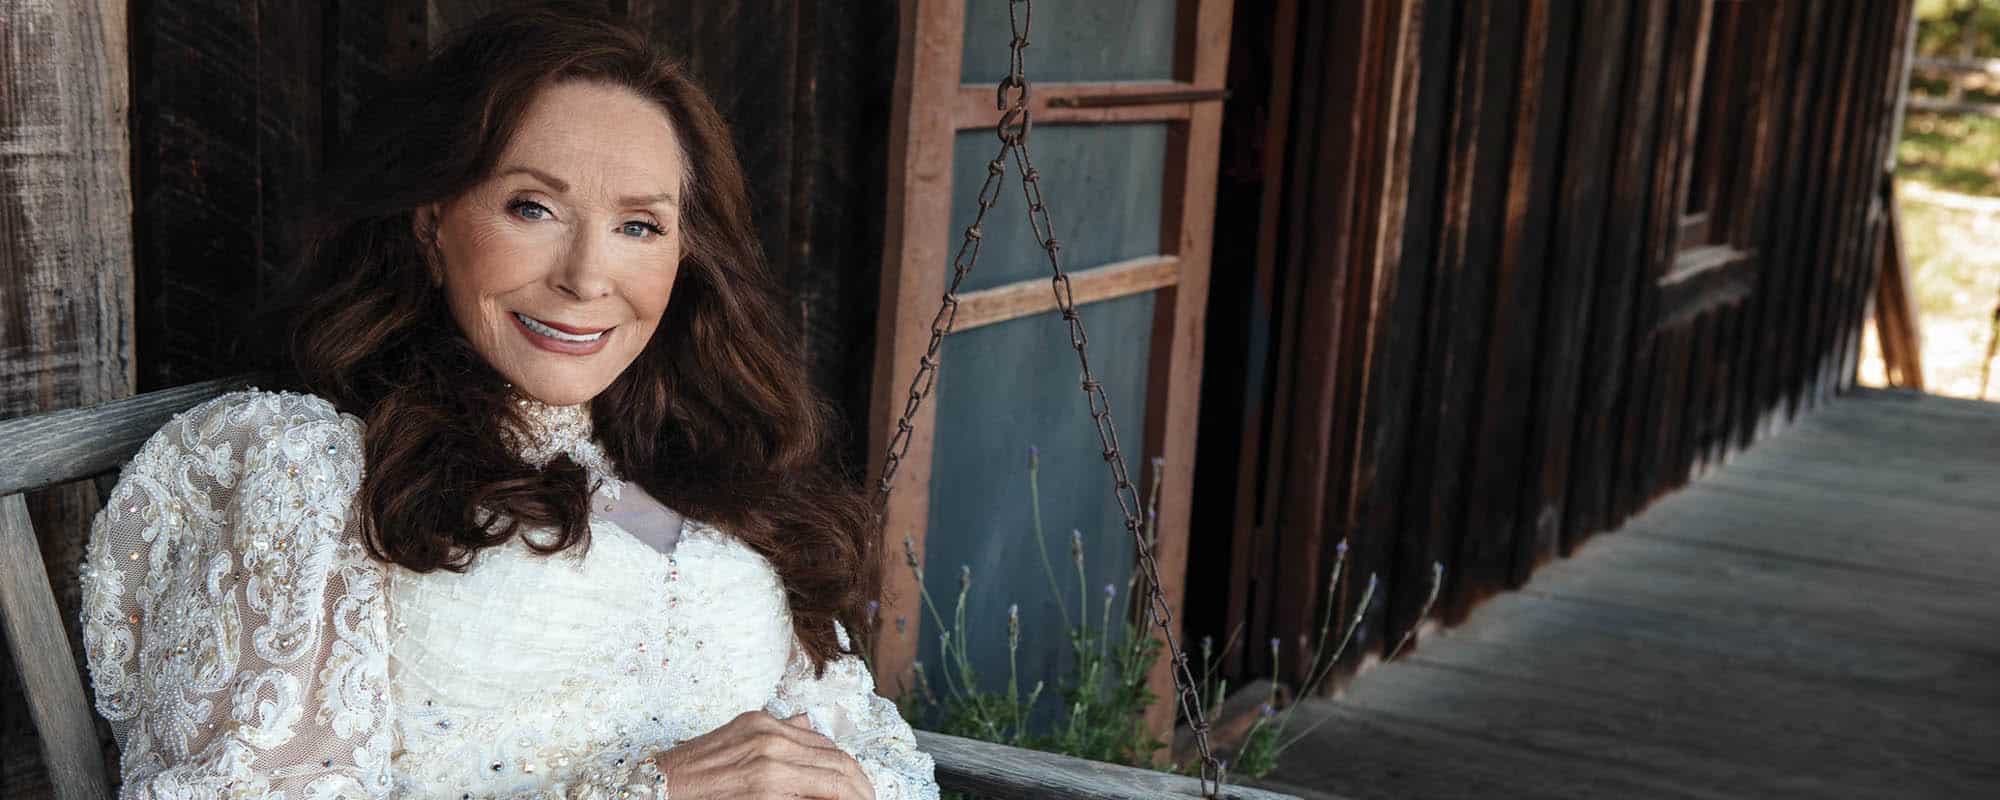 Loretta Lynn is ‘Still Woman Enough’ 50 Years and Albums Later